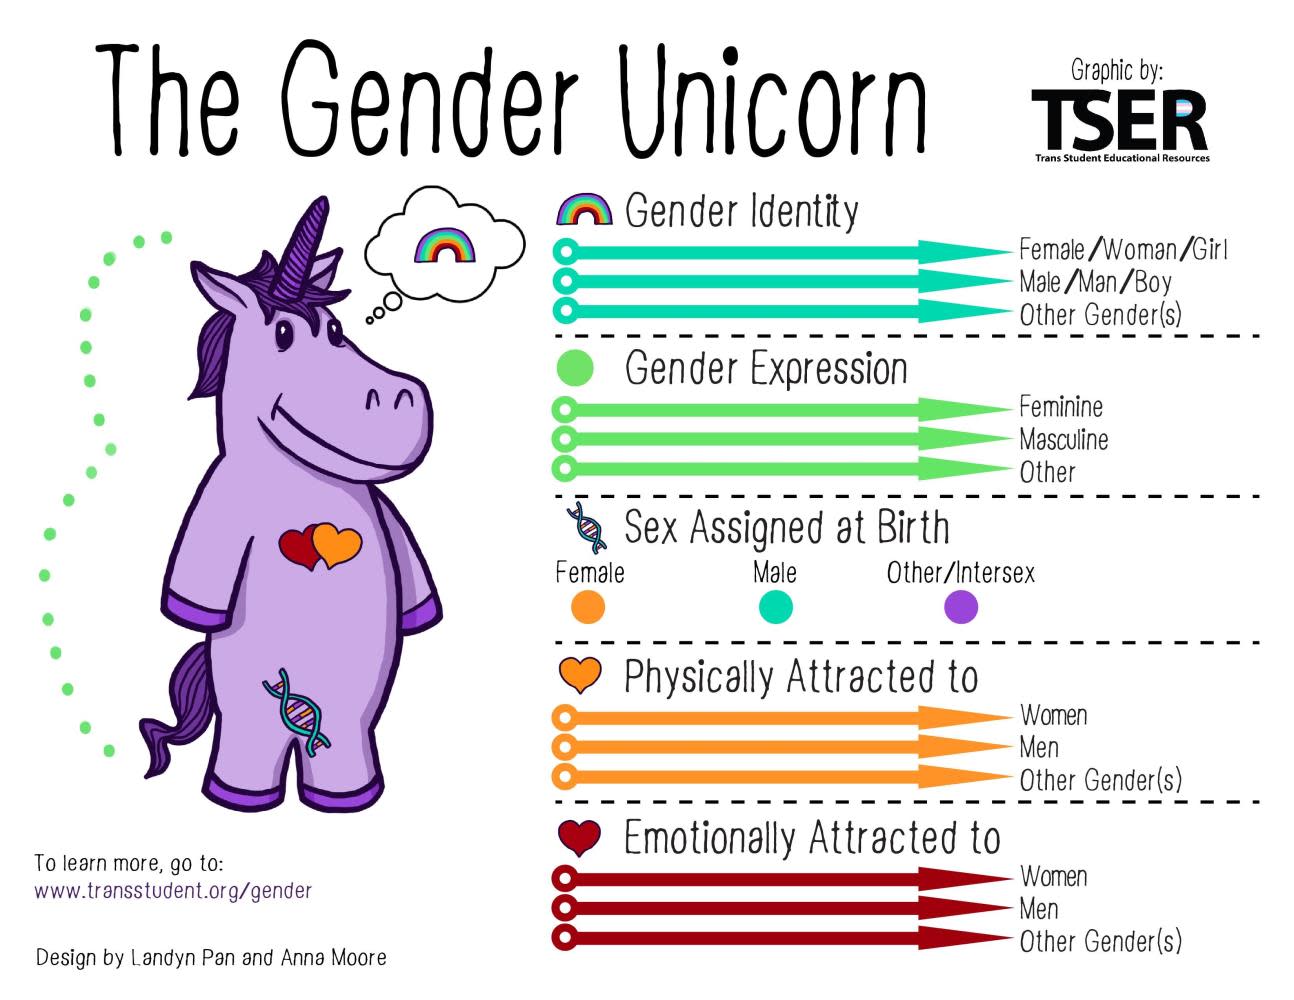 the gender unicorn infographic. A transcript is available to download below.